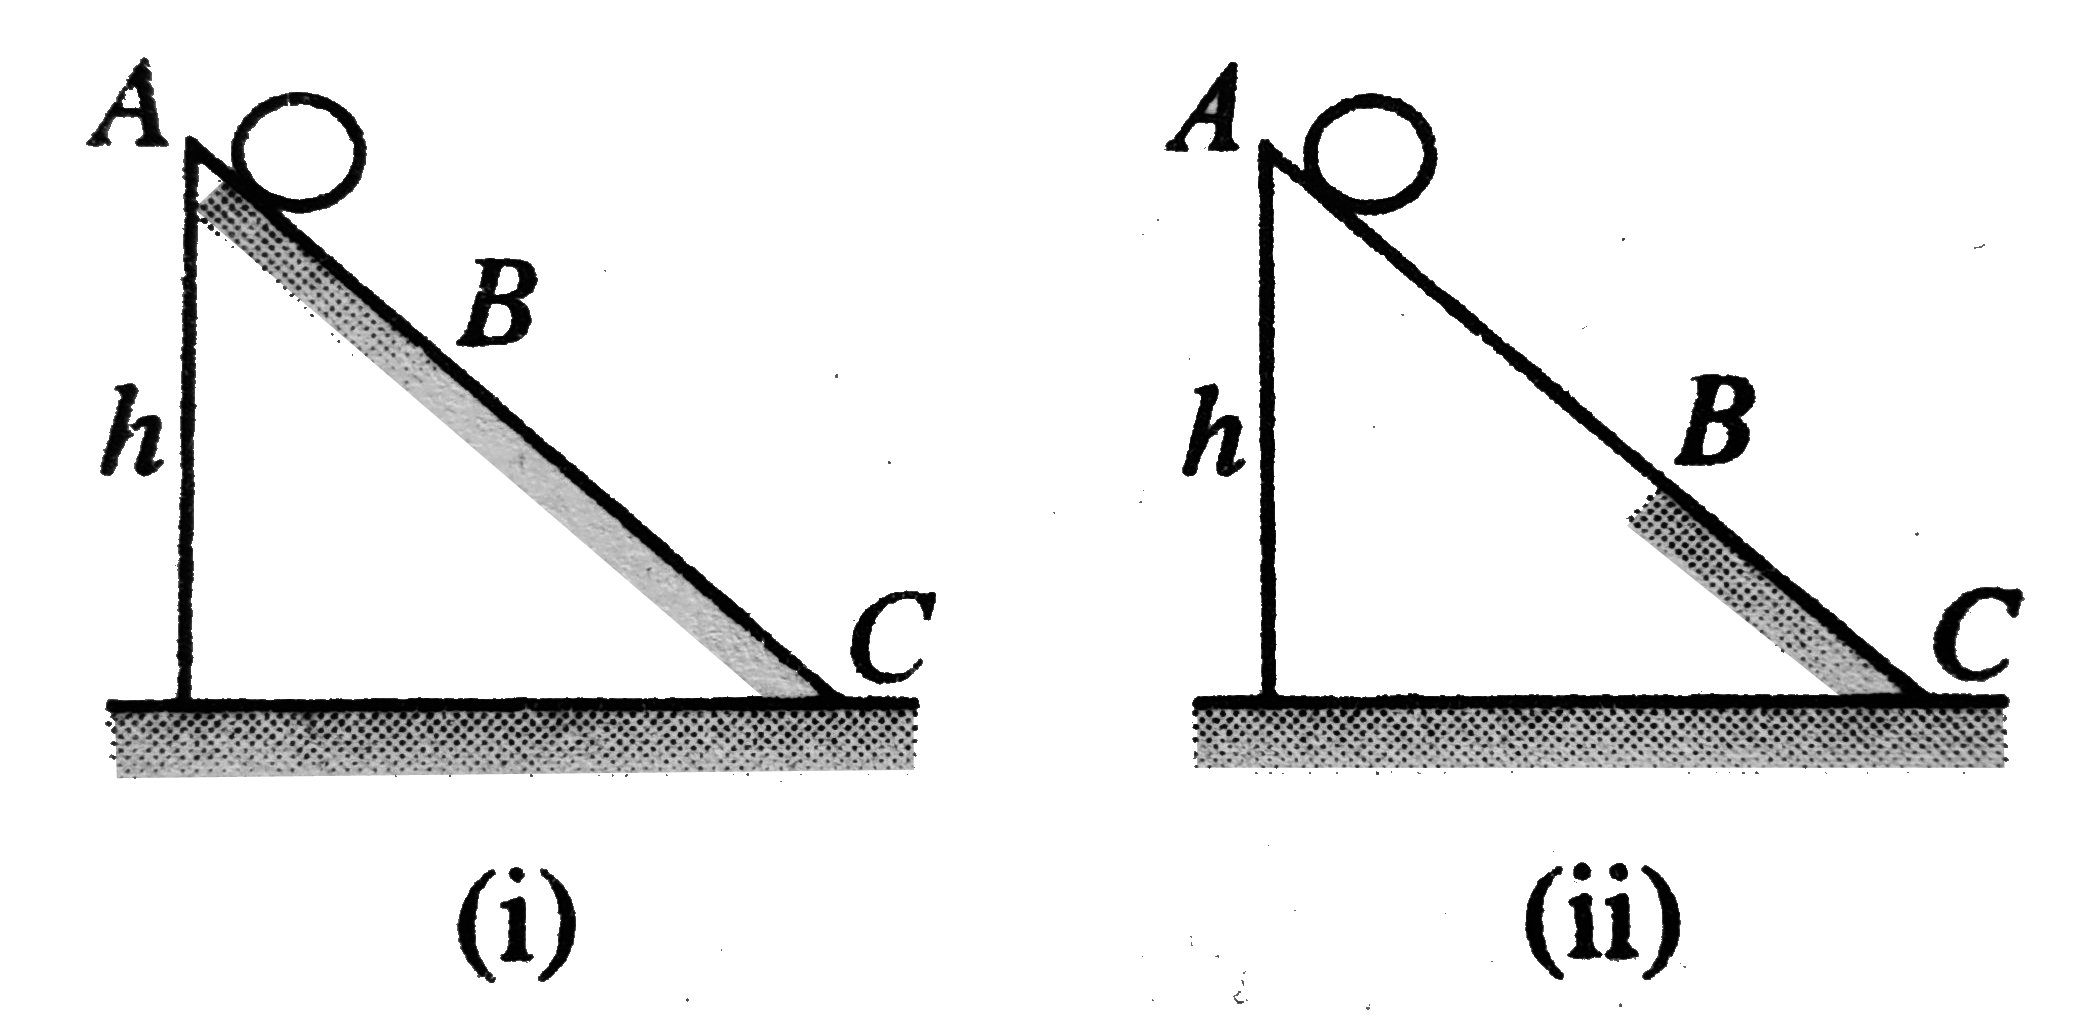 In both the figures all other factors are same, except that in figure (i) AB is rough and BC is smooth while in figure (ii) AB is smooth and BC is rough. In figure (i), if a sphere is released from rest it starts rolling. Now consider the figure (ii), if same sphere is A released from top of the inclined plane, what will be the kinetic energy of the sphere on reaching the bottom: